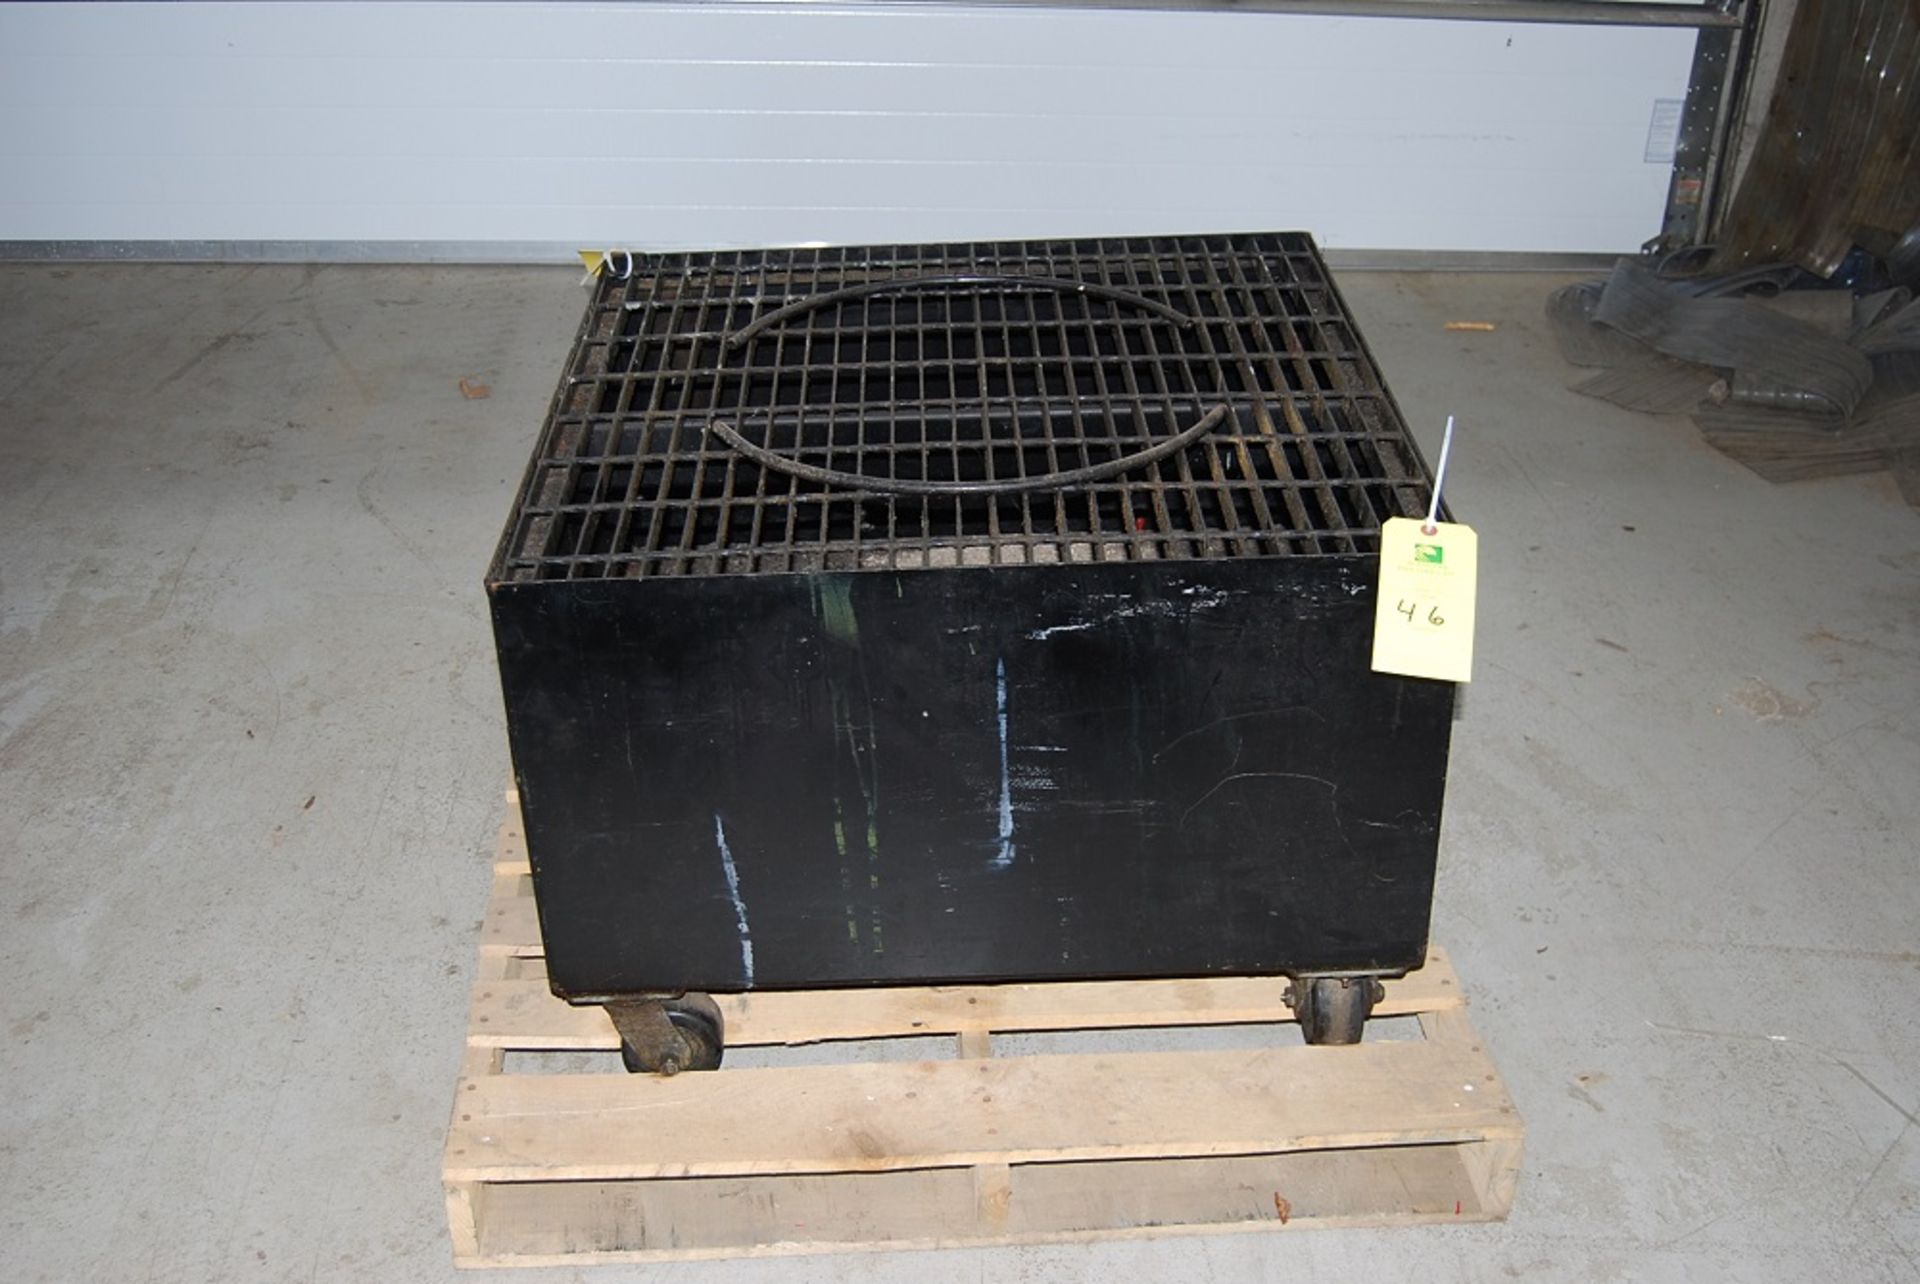 New Pig Spill Containment Pallet, Foot Print: 32.5" x 32.5" x 23" tall on casters